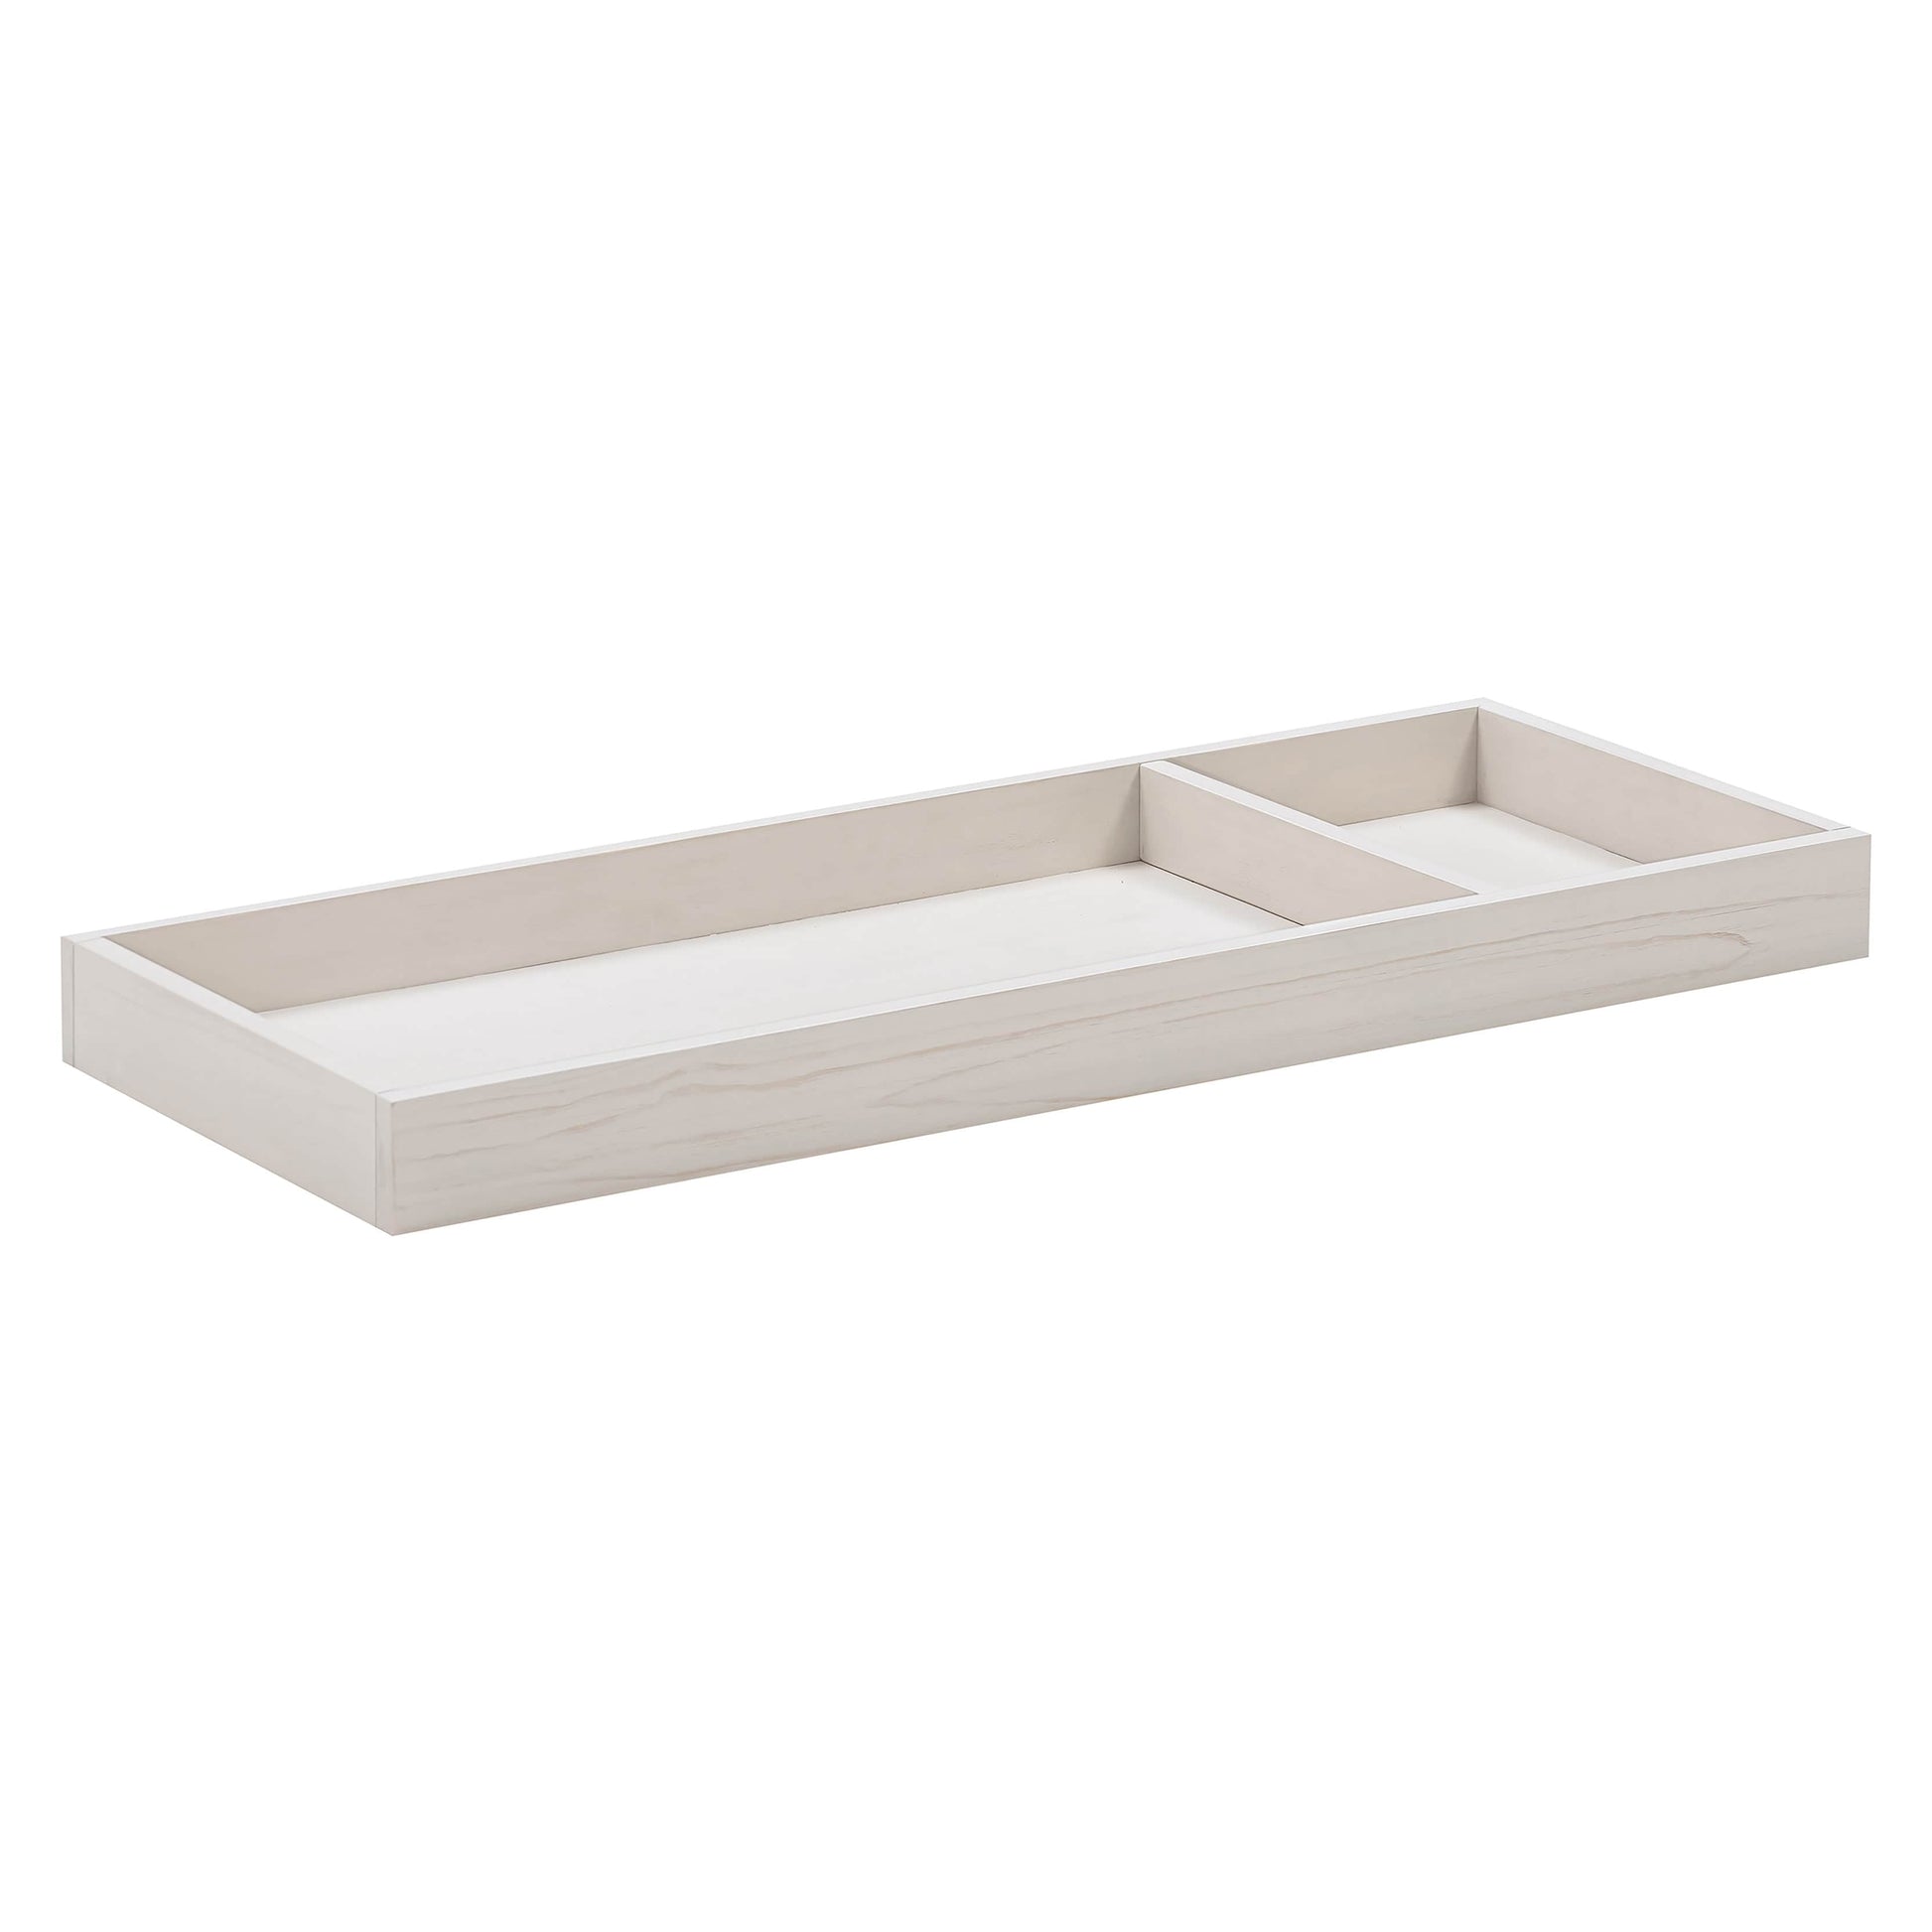 M0619WDF,Universal Wide Removable Changing Tray in White Driftwood